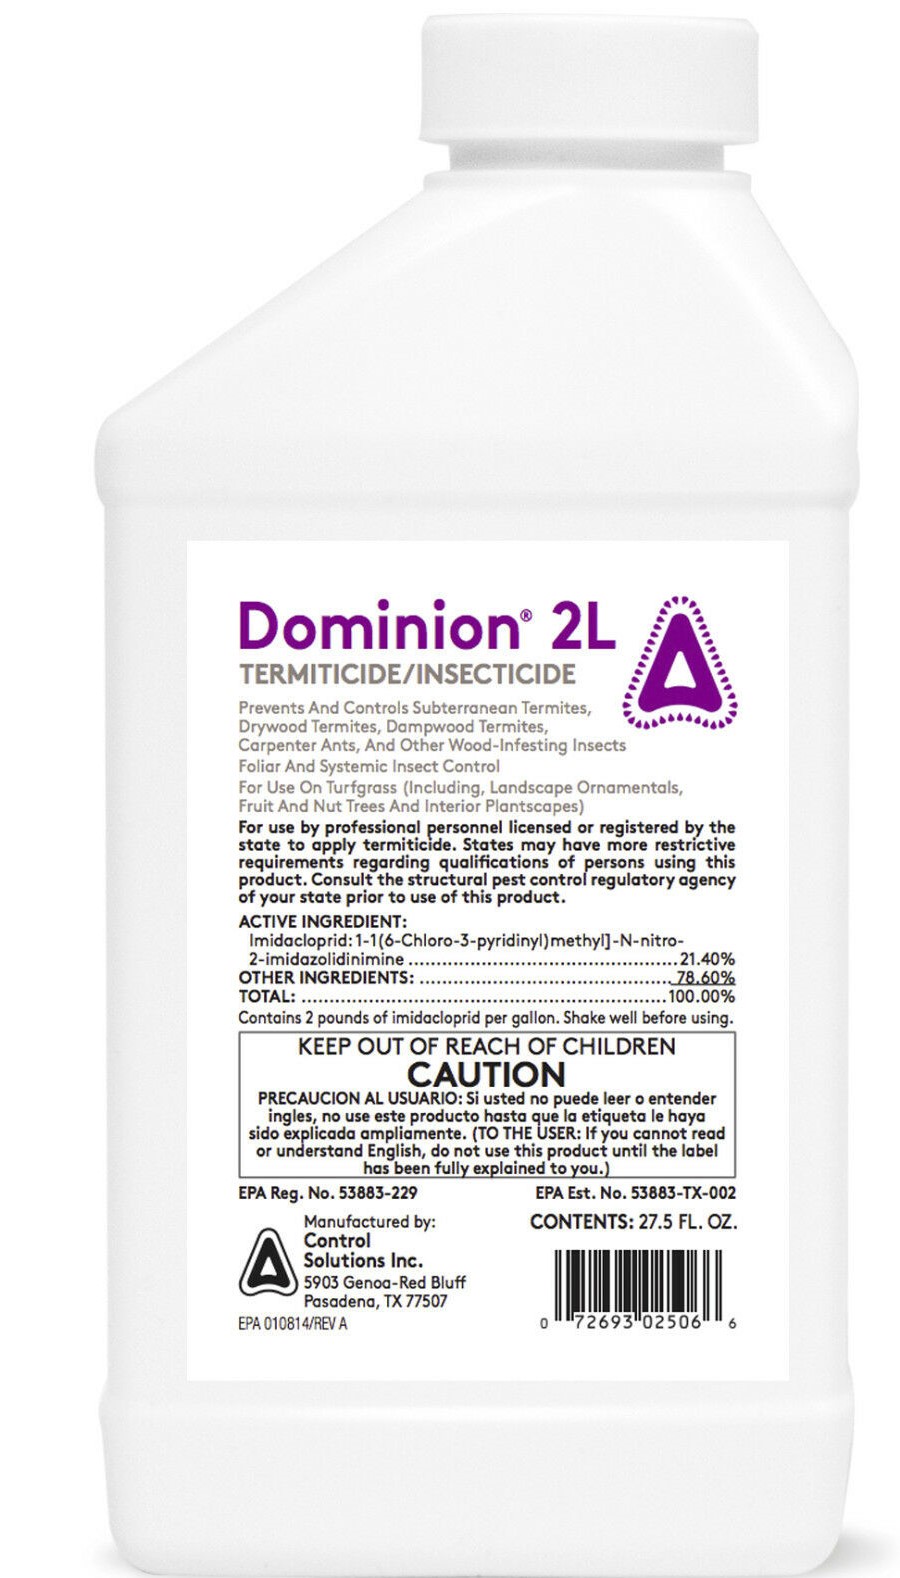 Buy Dominion - 2L-27.5oz - 1000ml Online | Construction Cleaning and Services | Qetaat.com